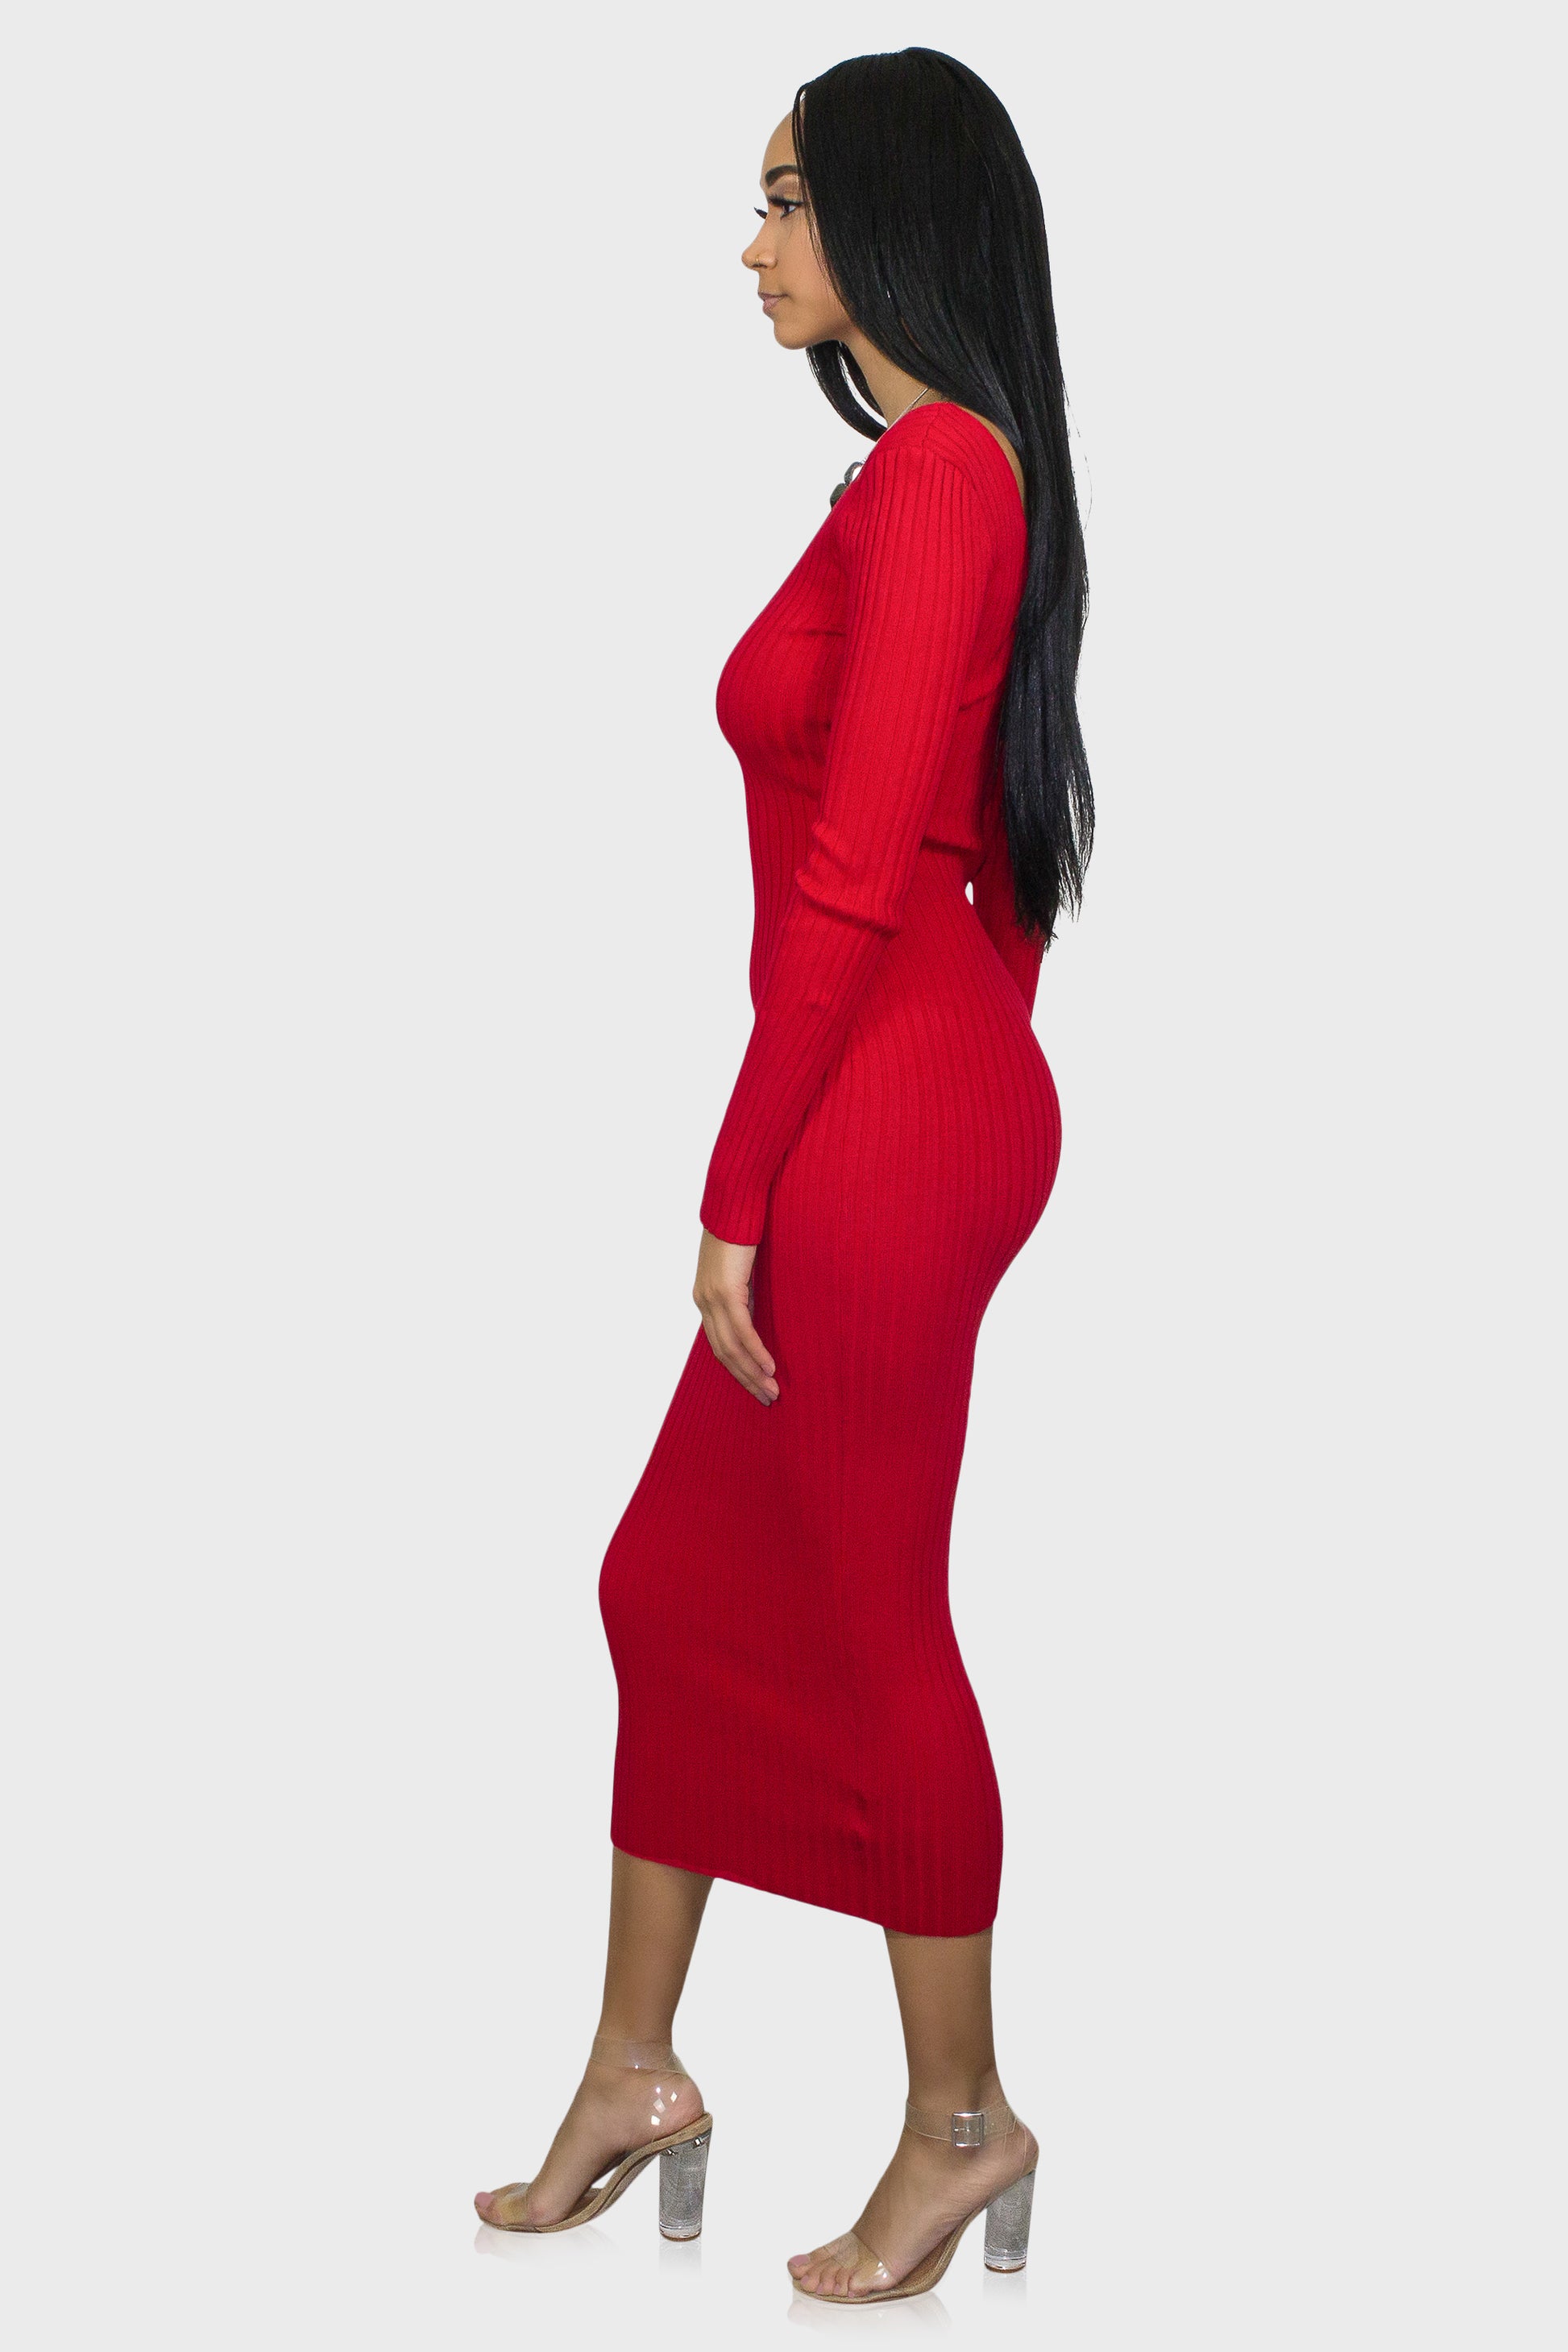 Express, Puff Sleeve Mock Neck Bodycon Sweater Dress in Racing Red